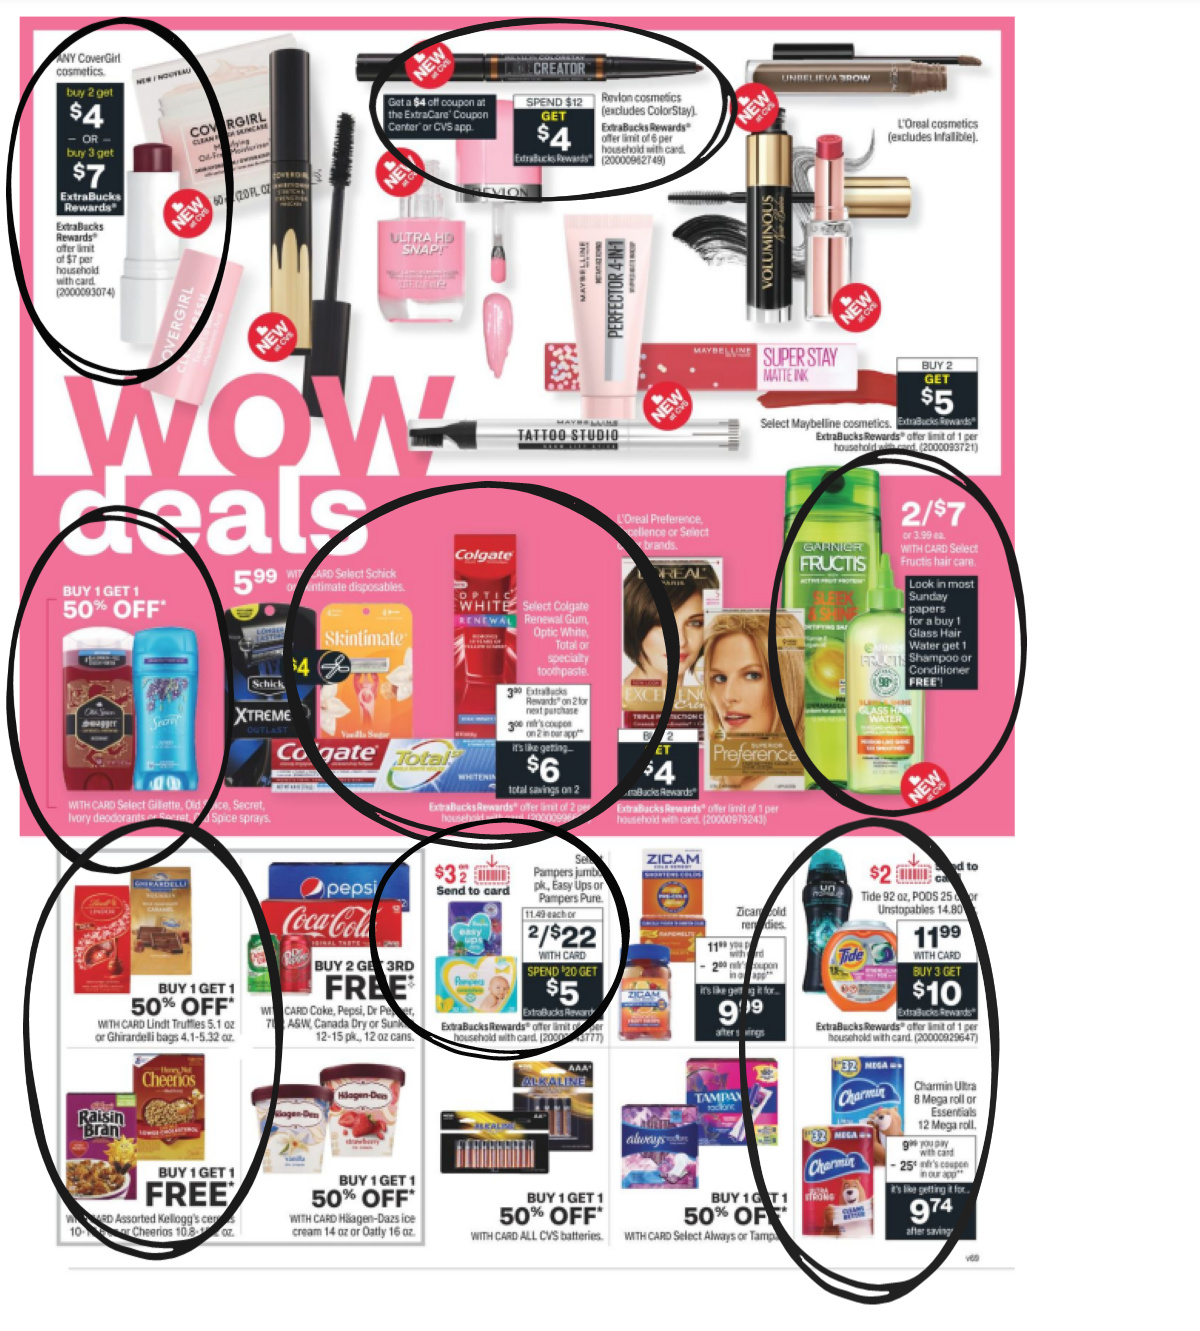 CVS ad page with circles